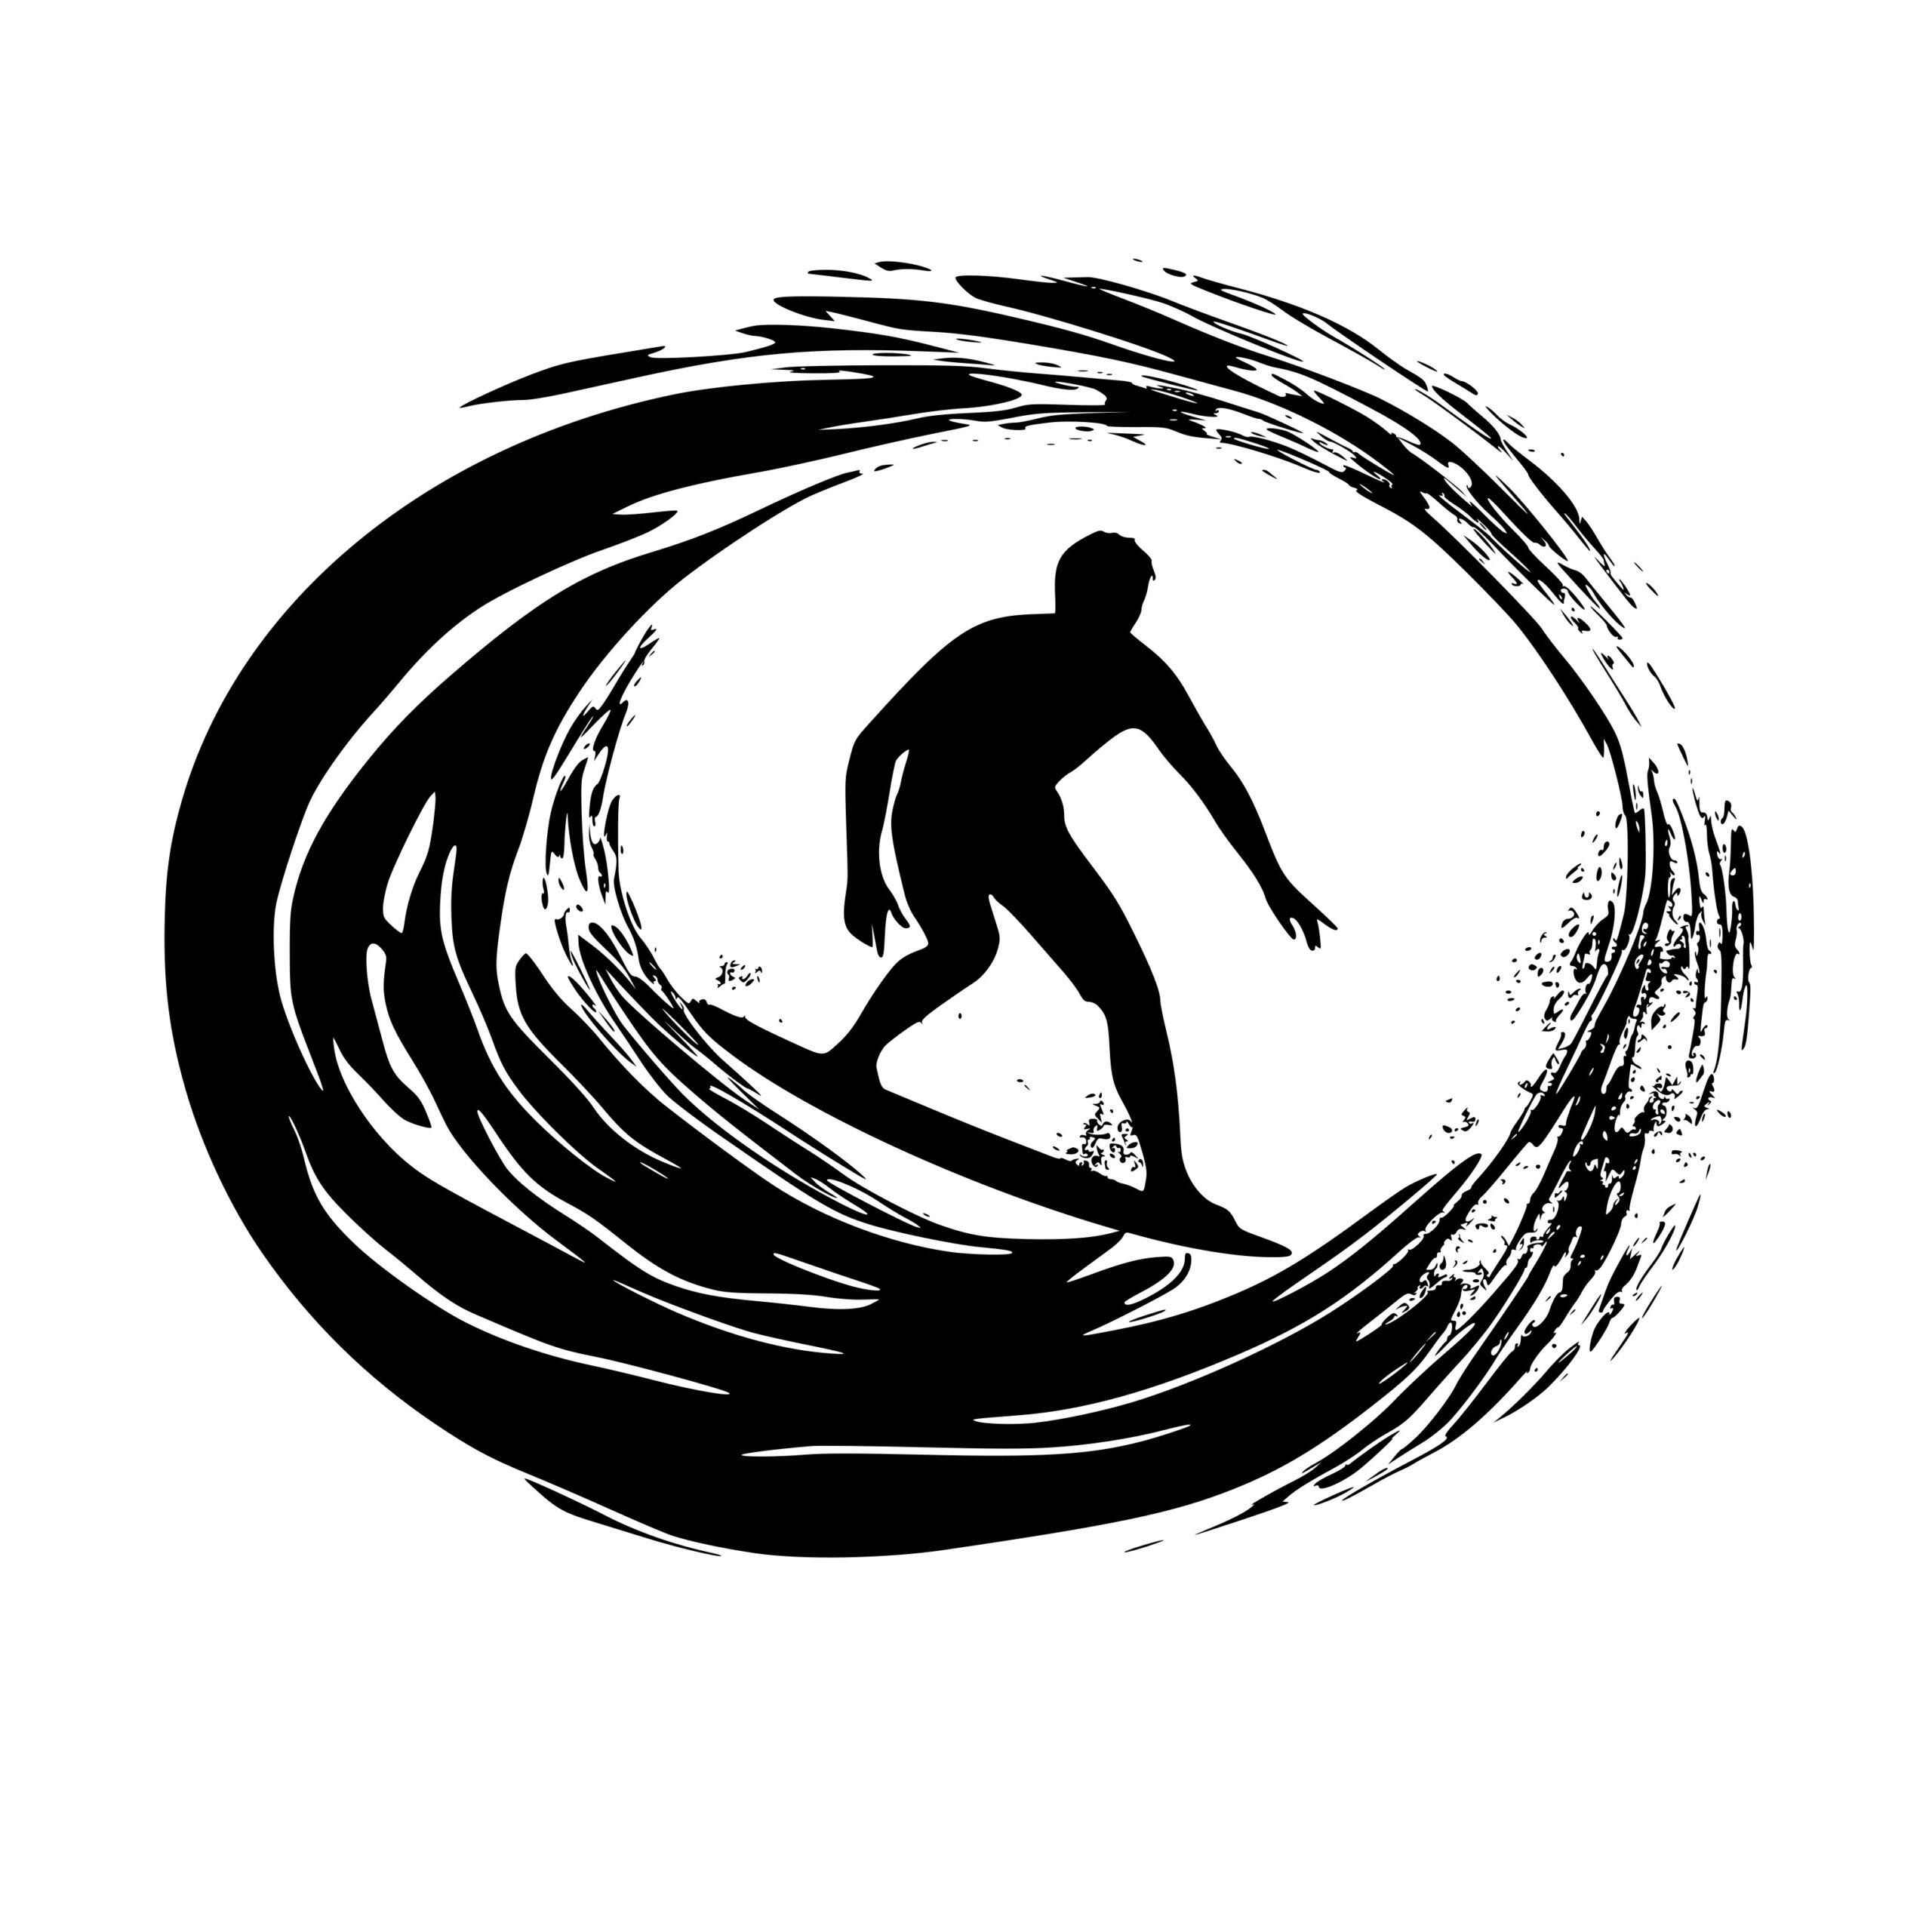 Surfer Riding Wave SVG File: Perfect for Cricut, Silhouette, Laser Machines